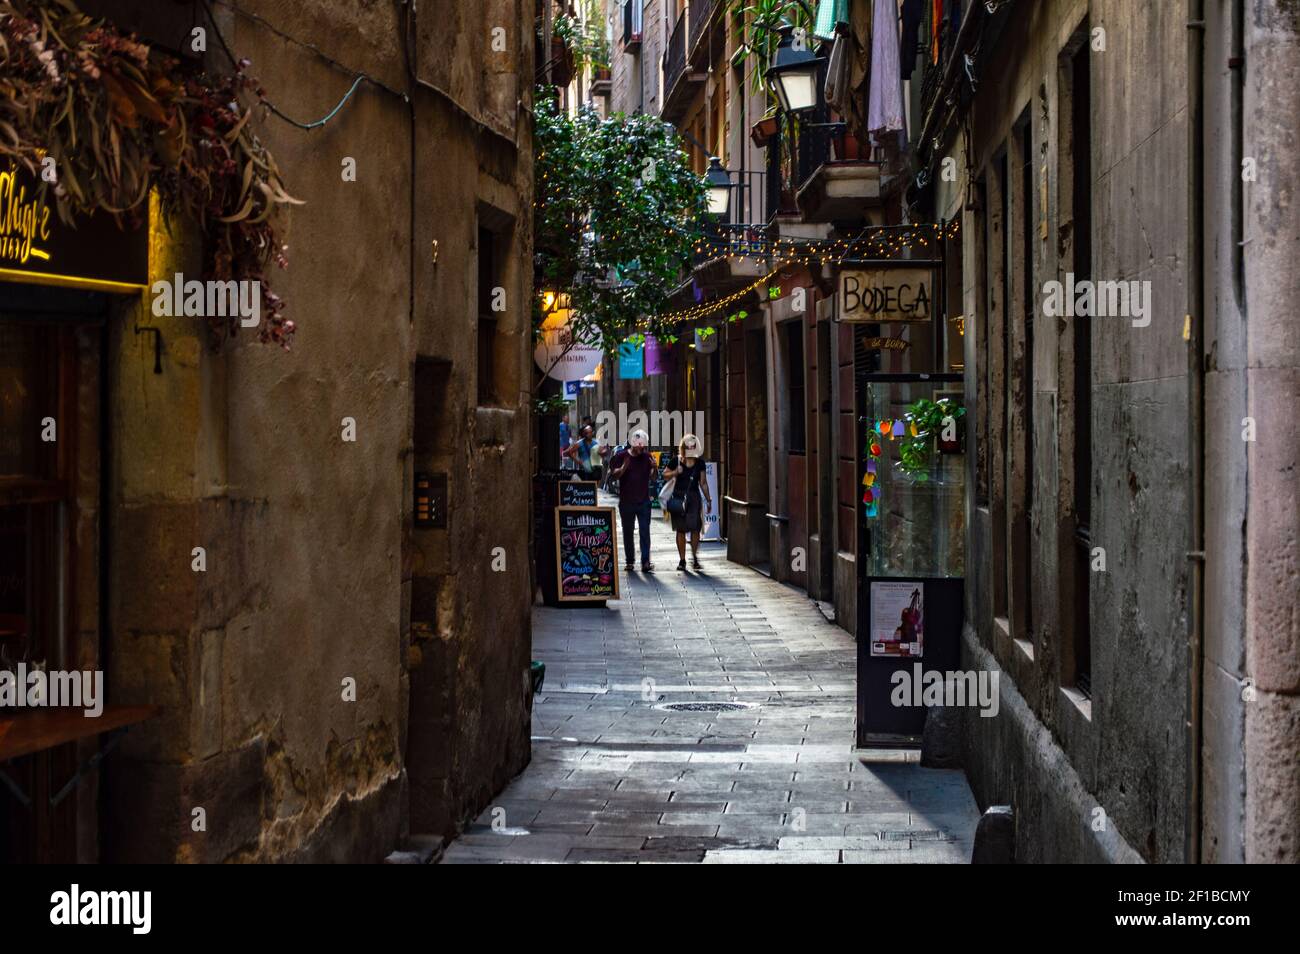 Barcelona, Spain - July 25, 2019: Lively street with lights, cafes and shops in the Roman quarter of the city of Barcelona, Spain Stock Photo